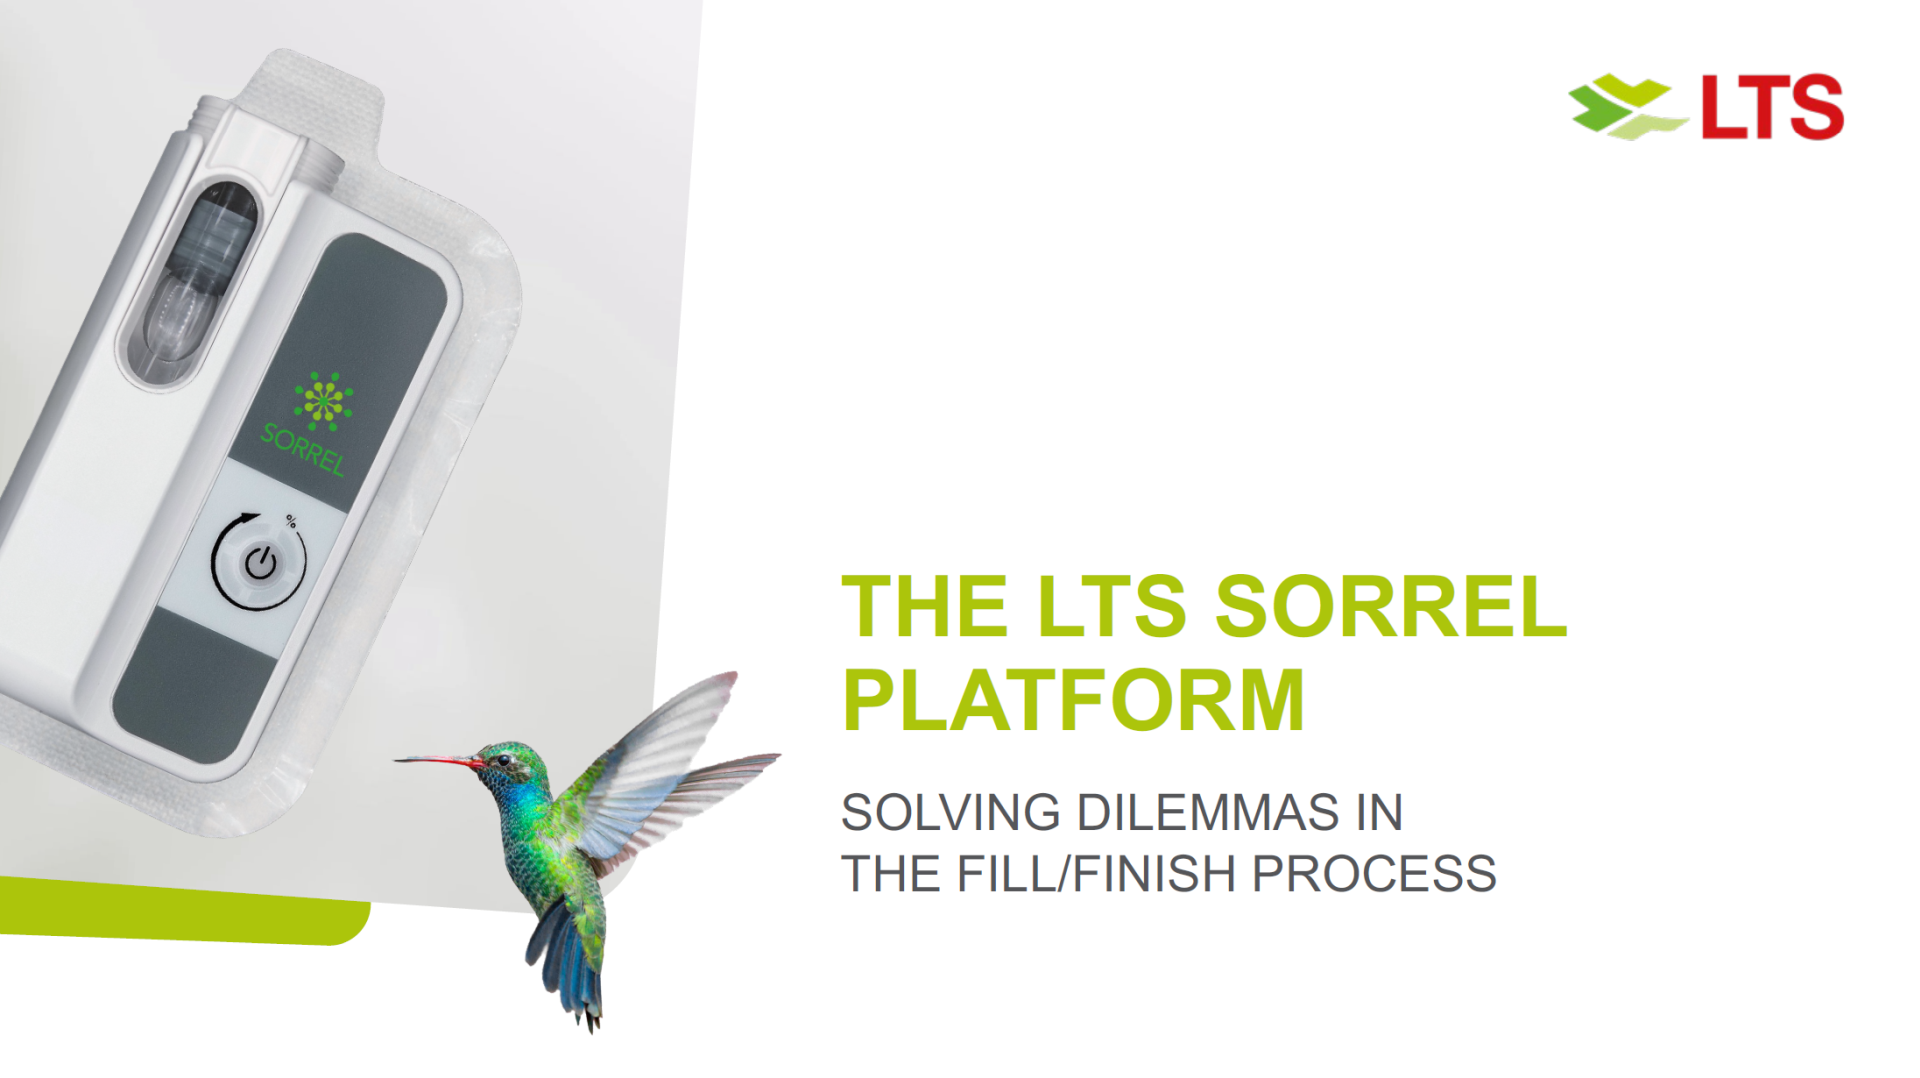 Watch our webcast with Greg Moakes talking about “The LTS SorrelTM Platform – Solving Dilemmas in the fill/finish process”.